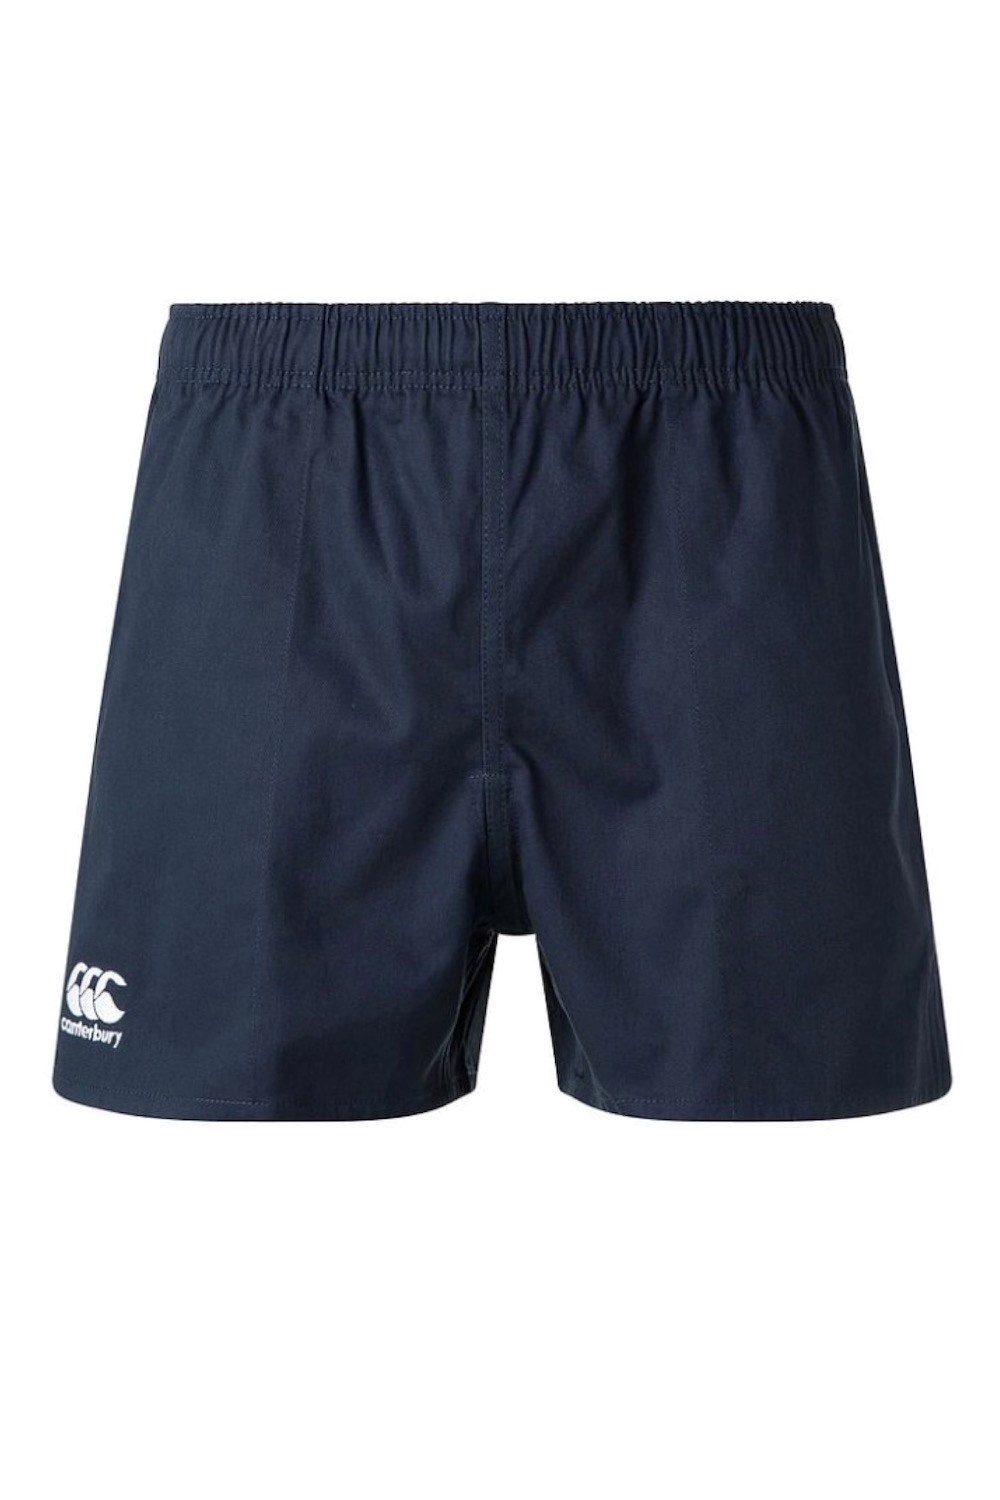 Professional Mens Cotton Rugby Shorts -